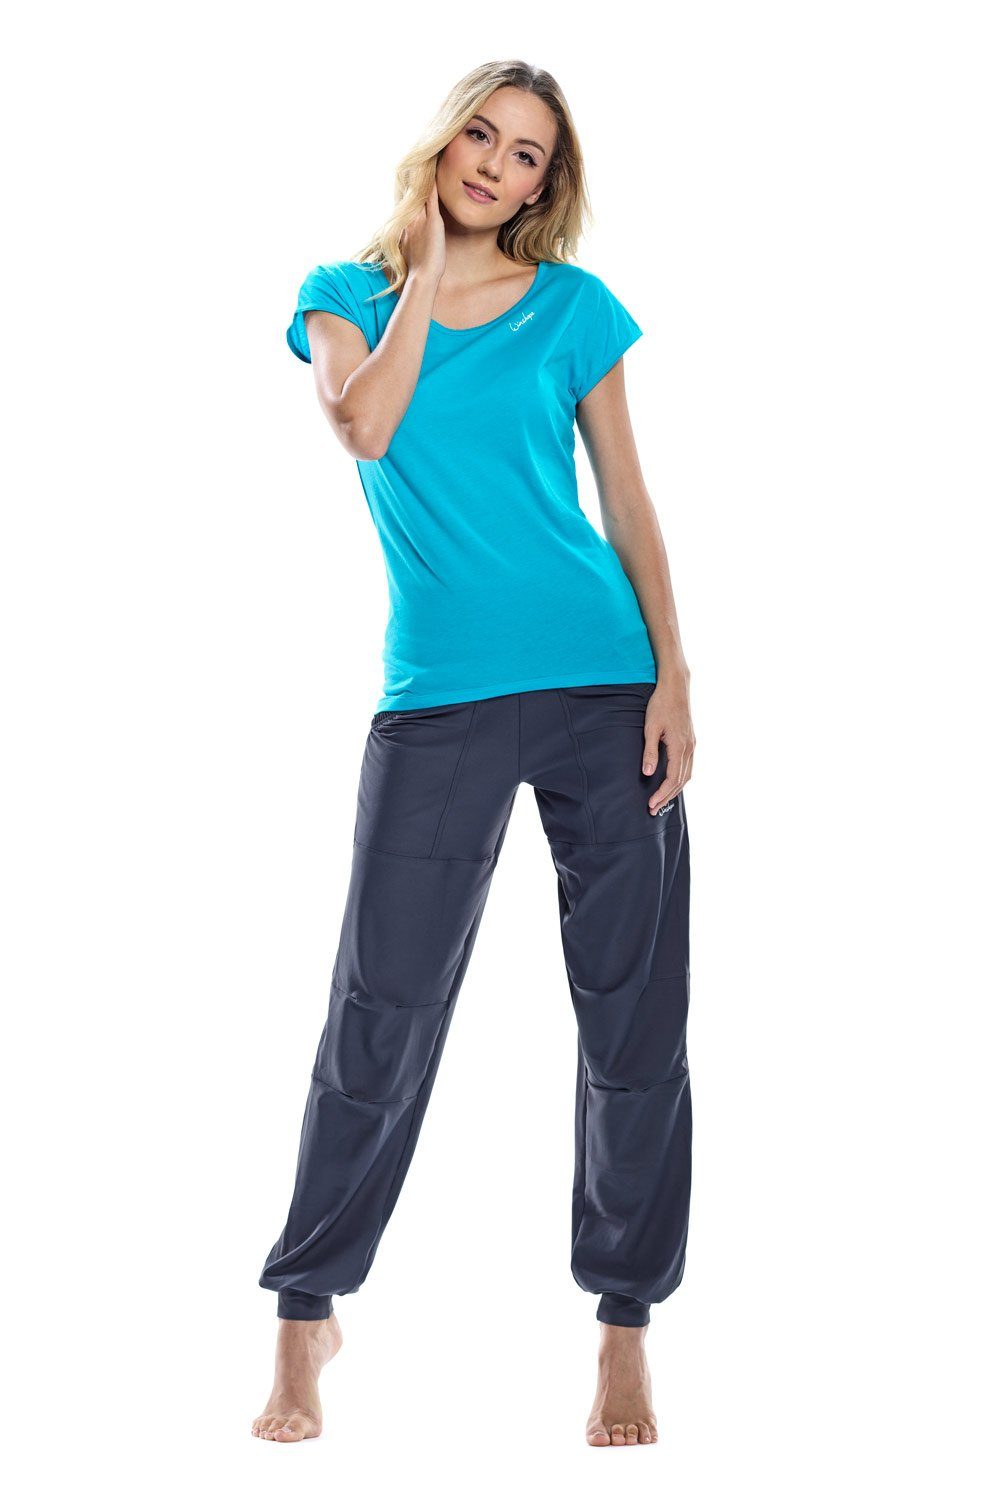 Winshape Sporthose Waist anthrazit Leisure Time Functional Comfort LEI101C Trousers High